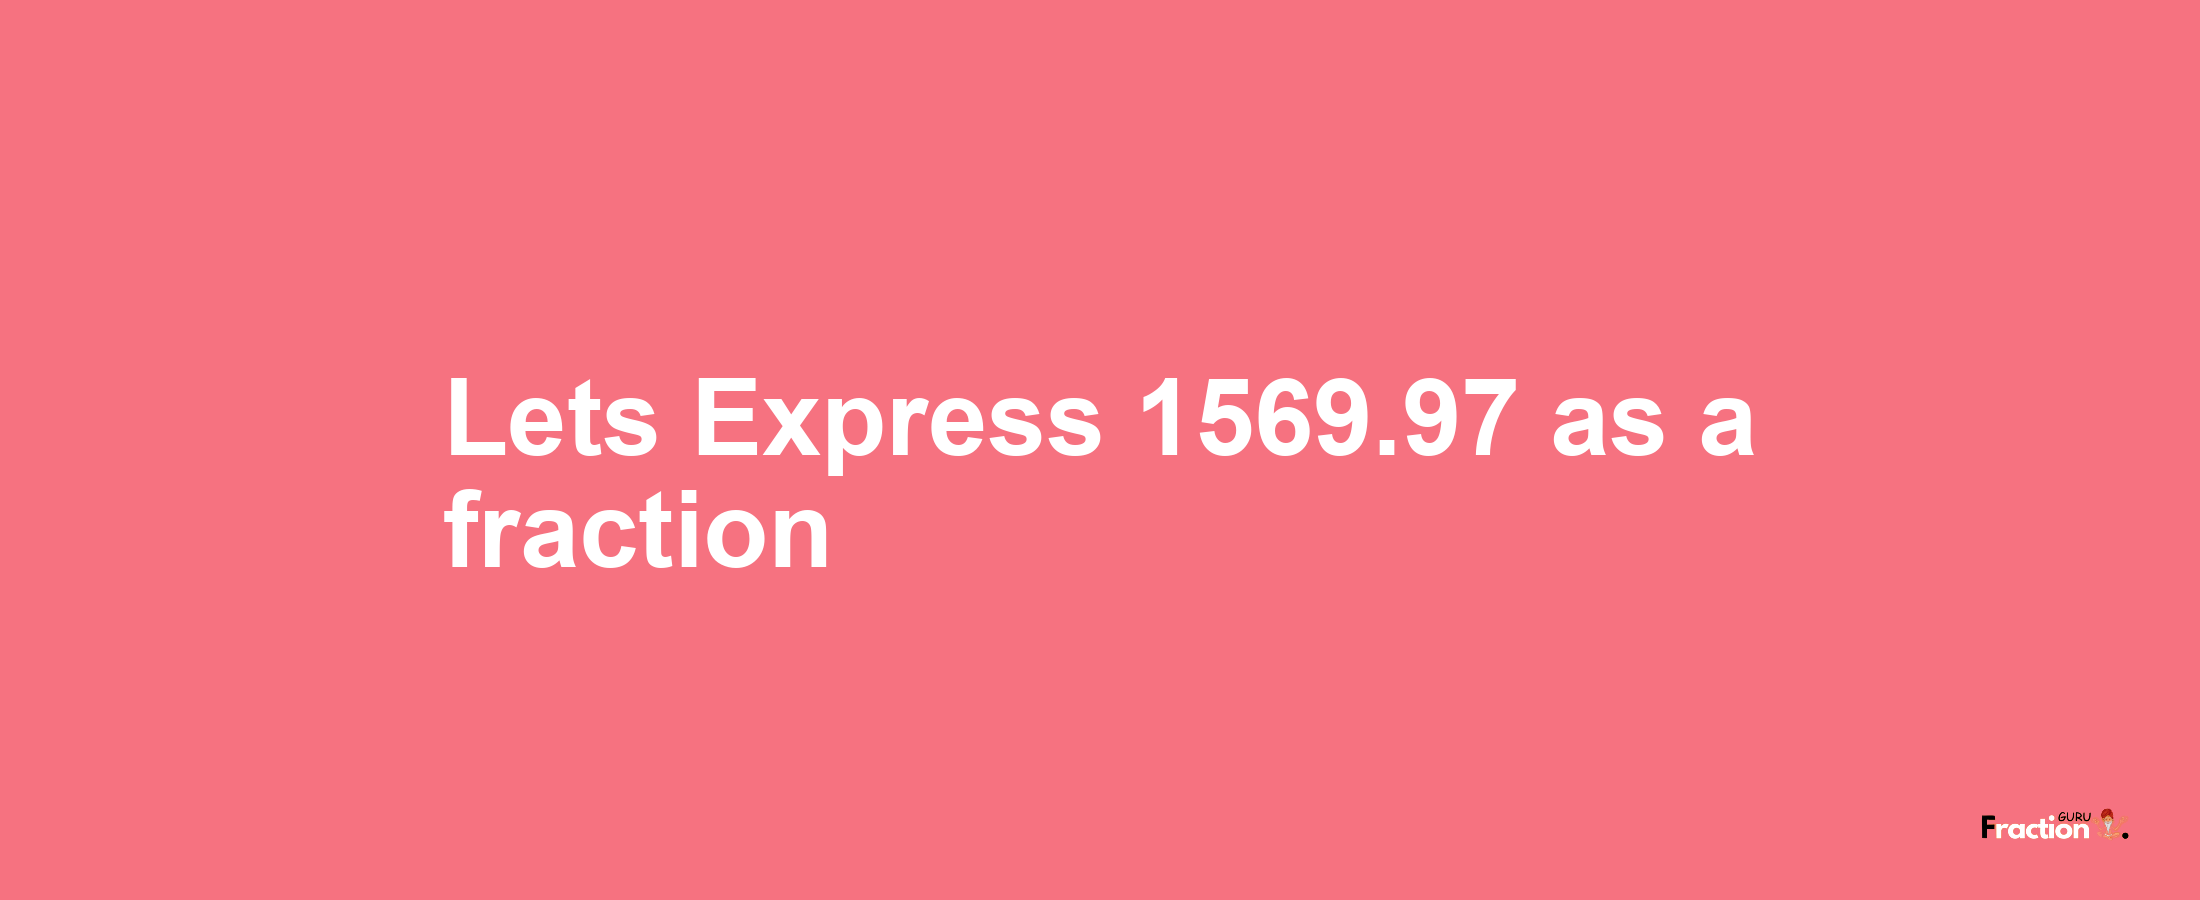 Lets Express 1569.97 as afraction